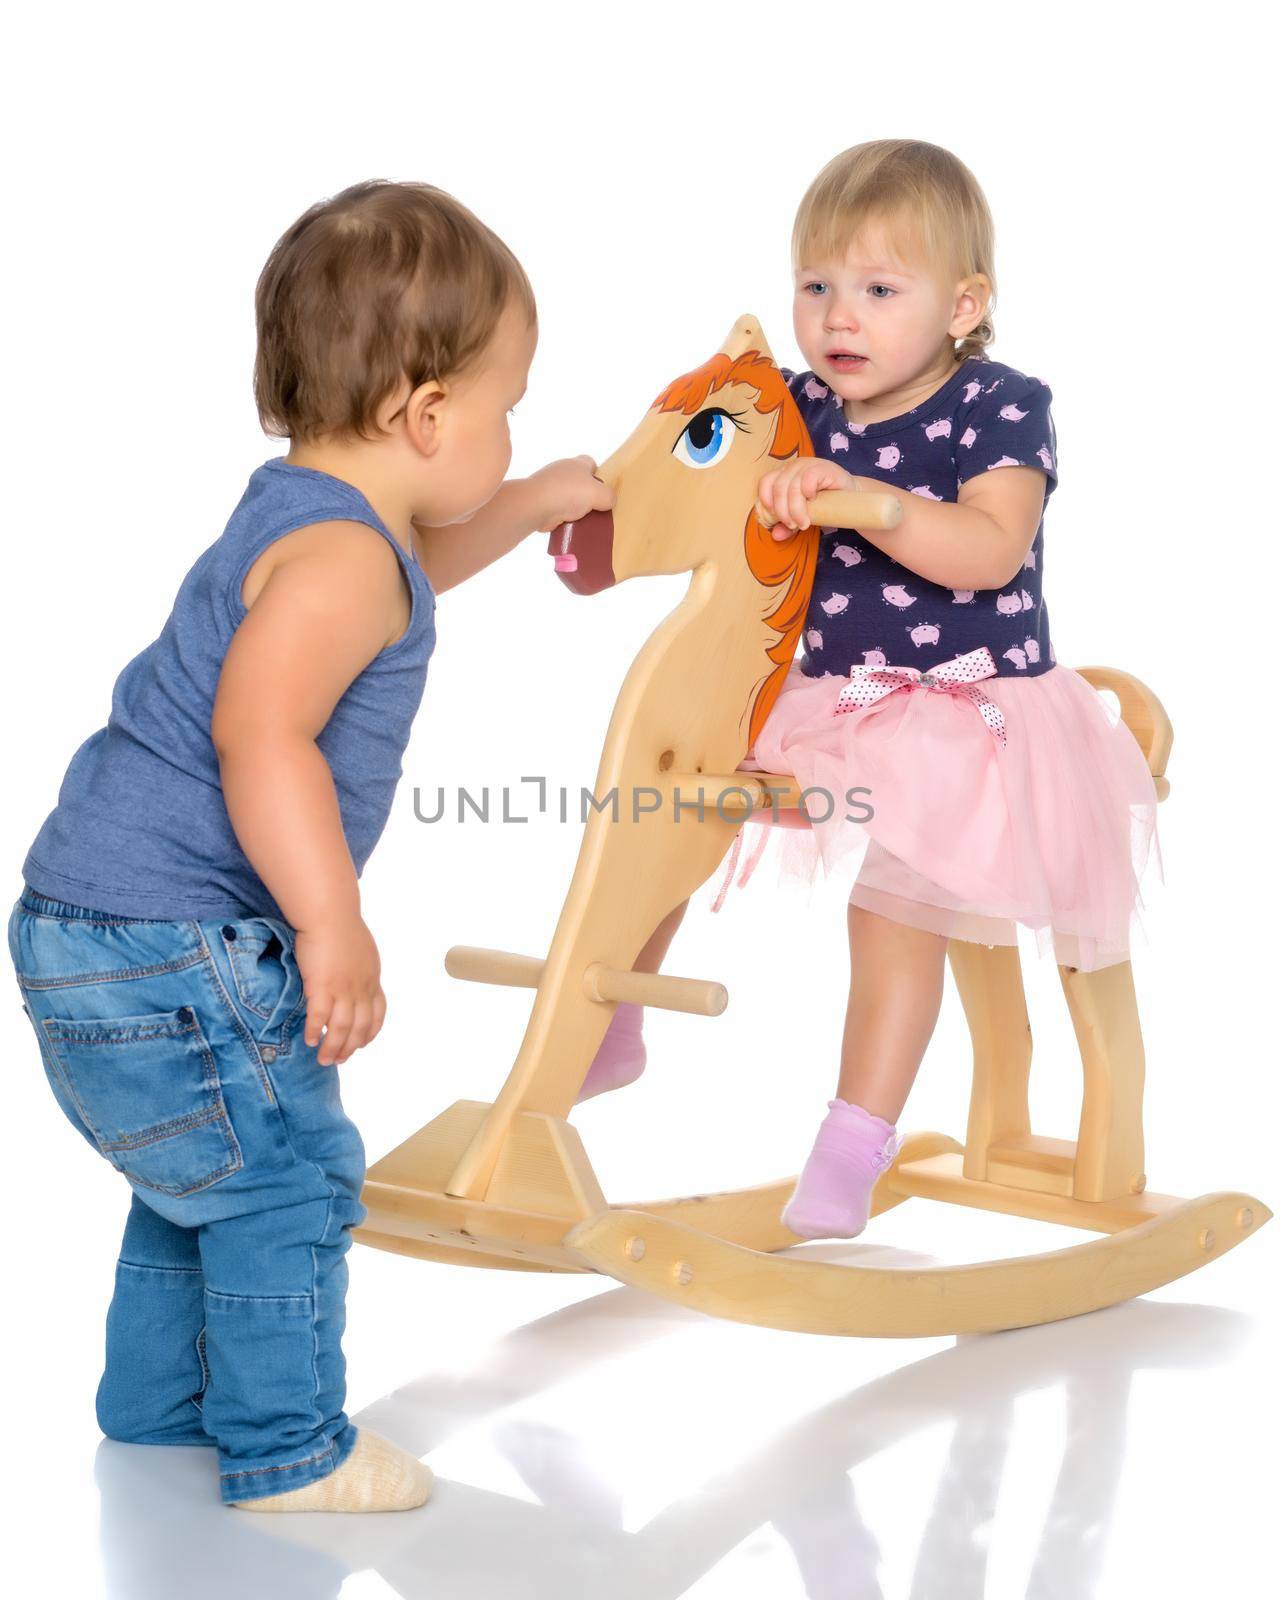 Toddler boy and girl playing with a wooden horse. The concept of a harmonious development of a child in the family, a happy childhood, people, a healthy lifestyle. Isolated on white background.